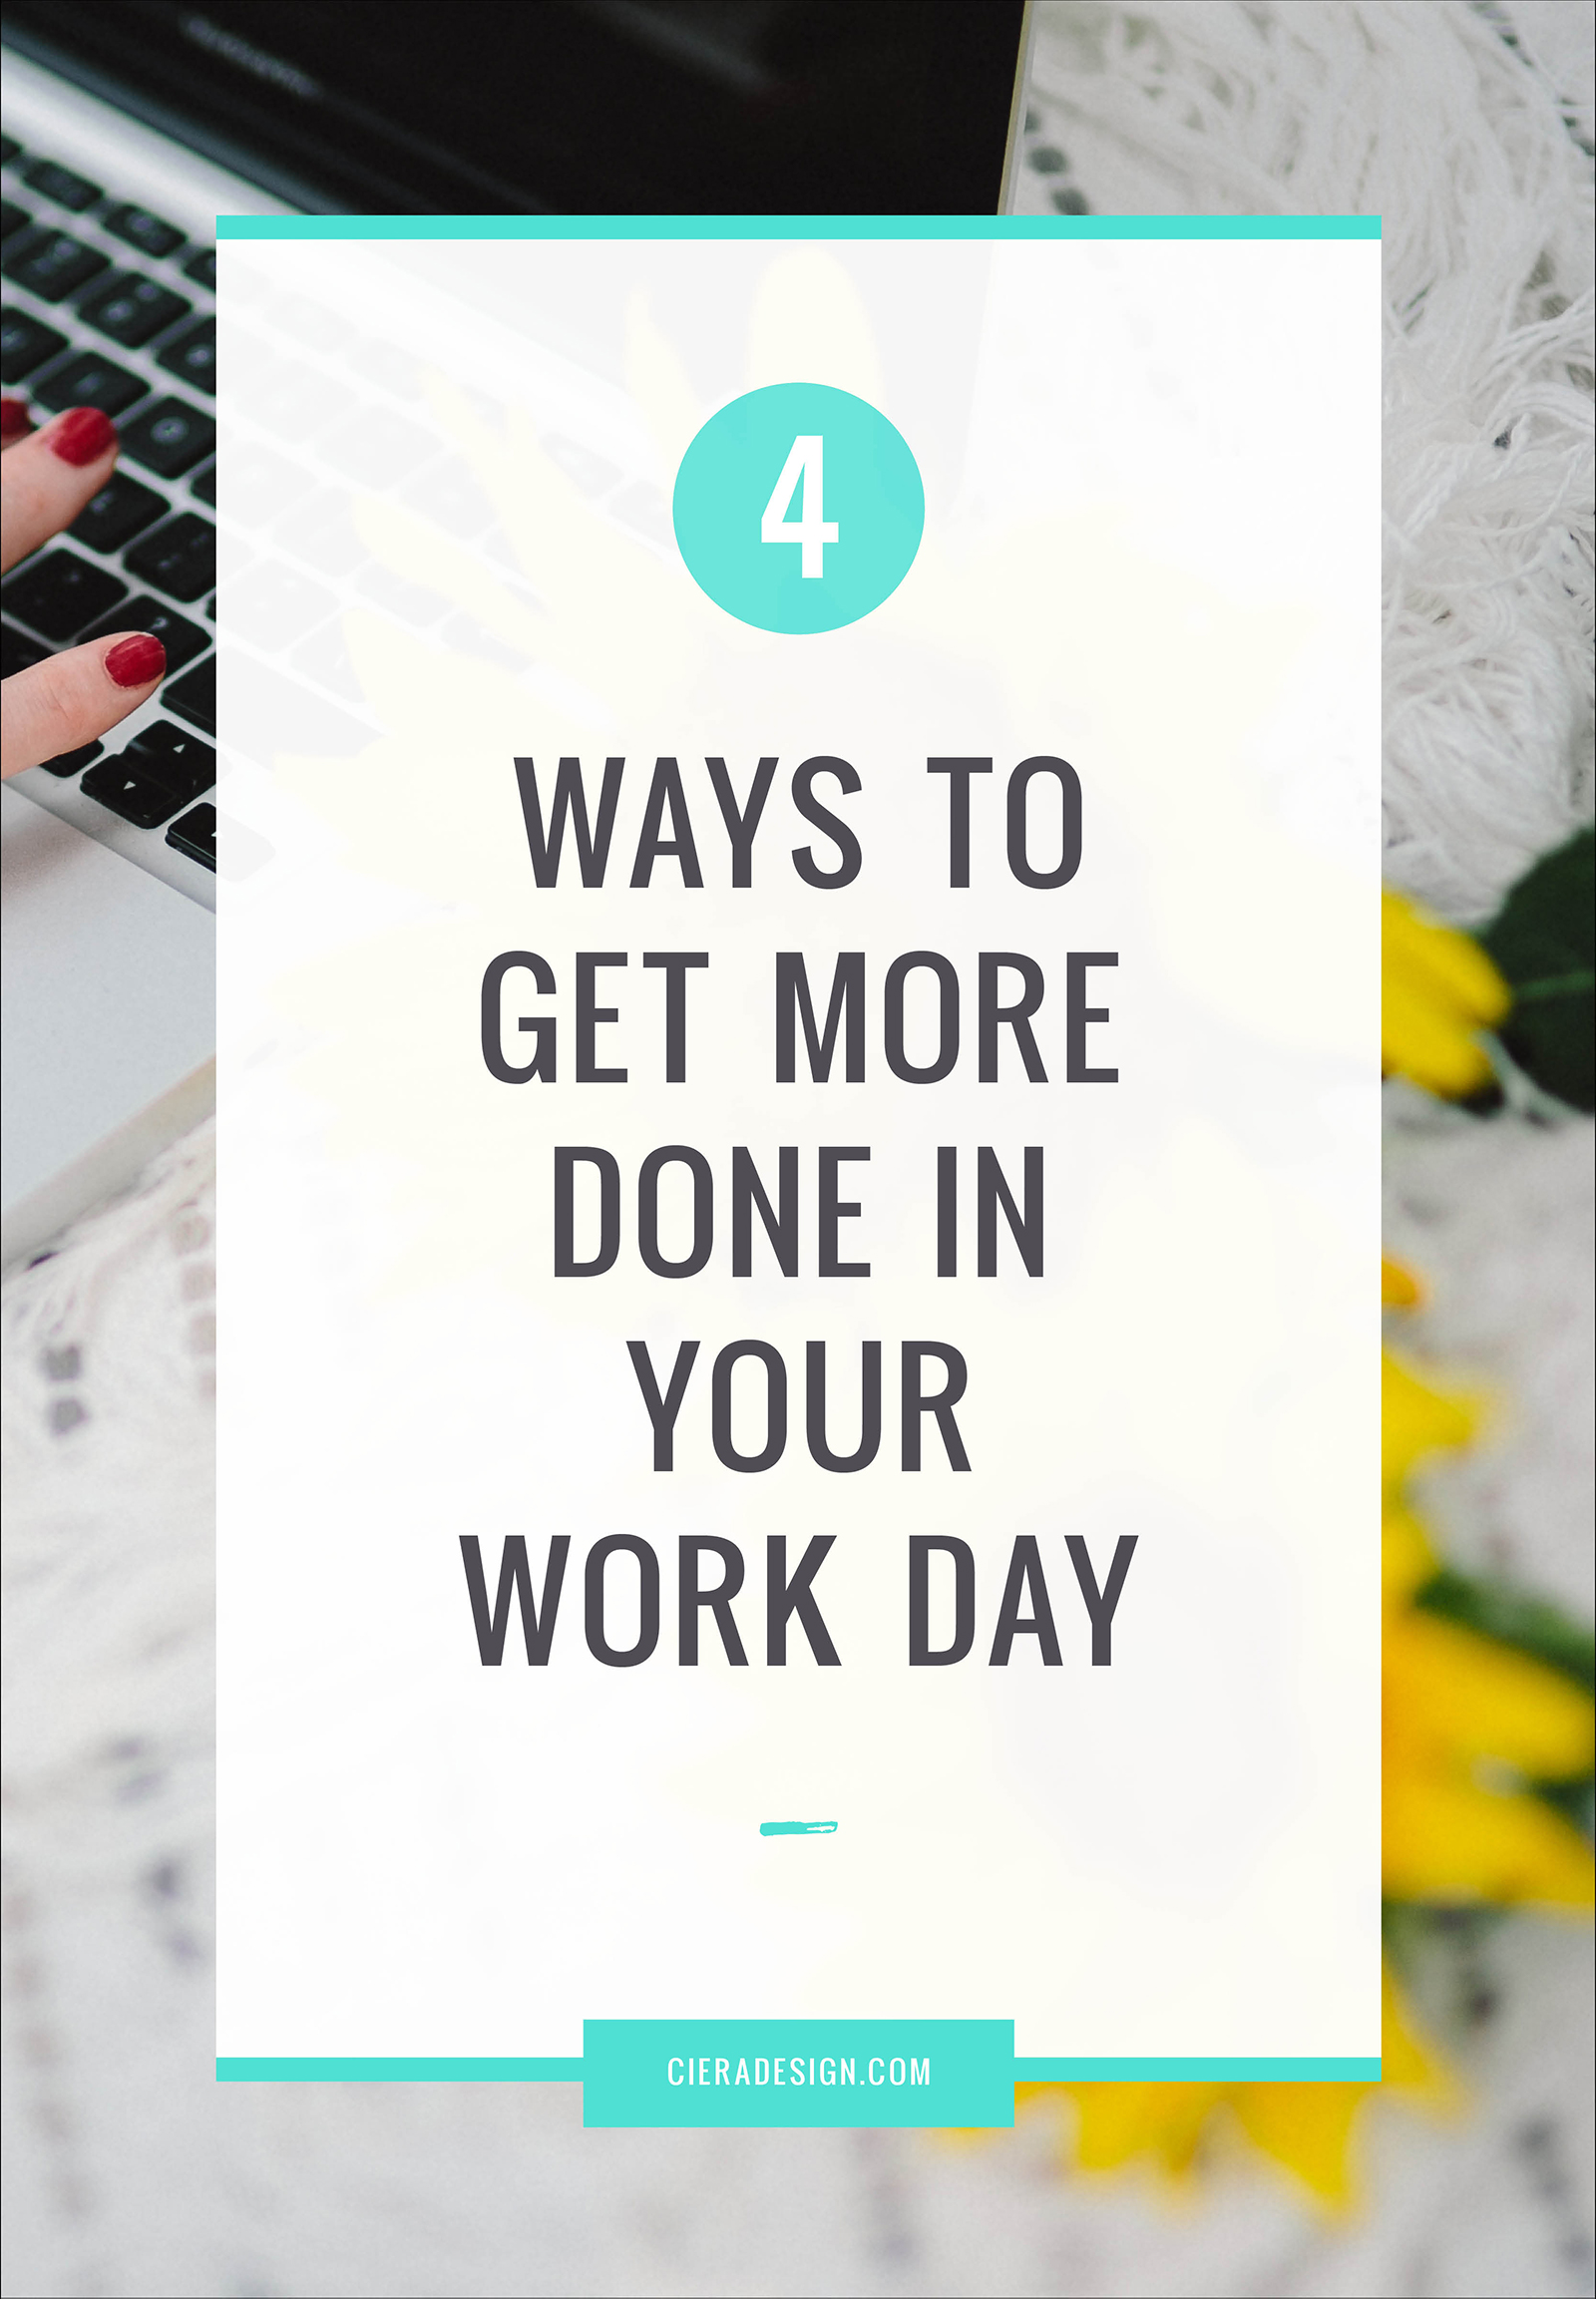 As a small business owner, you only have so much time in the day to get everything done. Sure, you could work overtime or start work especially early in the morning to give yourself a fighting chance, but this could lead to burnout if you push yourself too hard. Thankfully, there are some simple ways to get more things done each day, without the problem of exhaustion affecting your life. Take a look at our ideas.